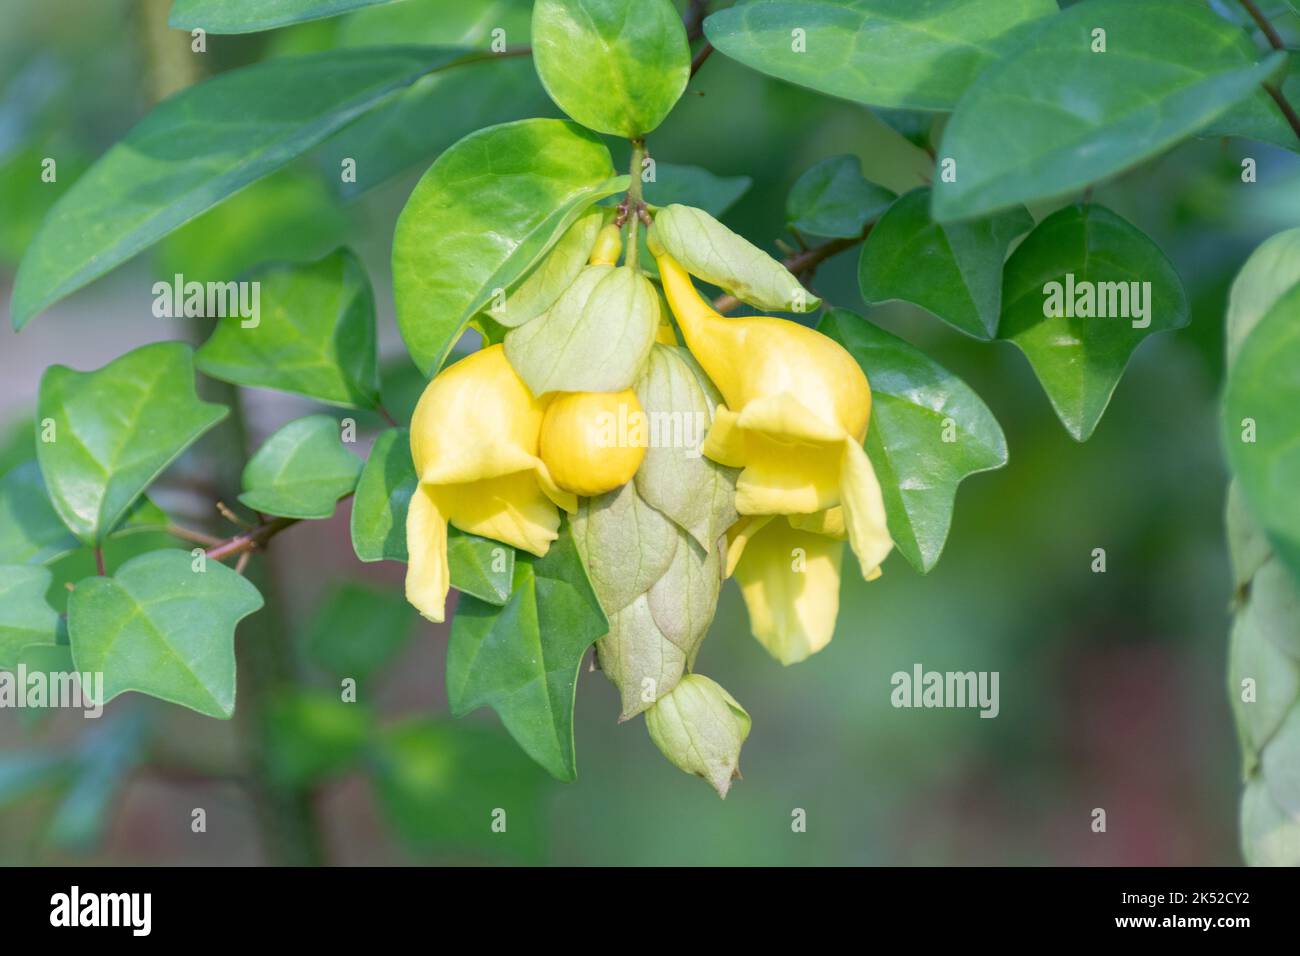 The yellow flower clusters of the Parrot's Beak tree growing in a garden in summer. Stock Photo